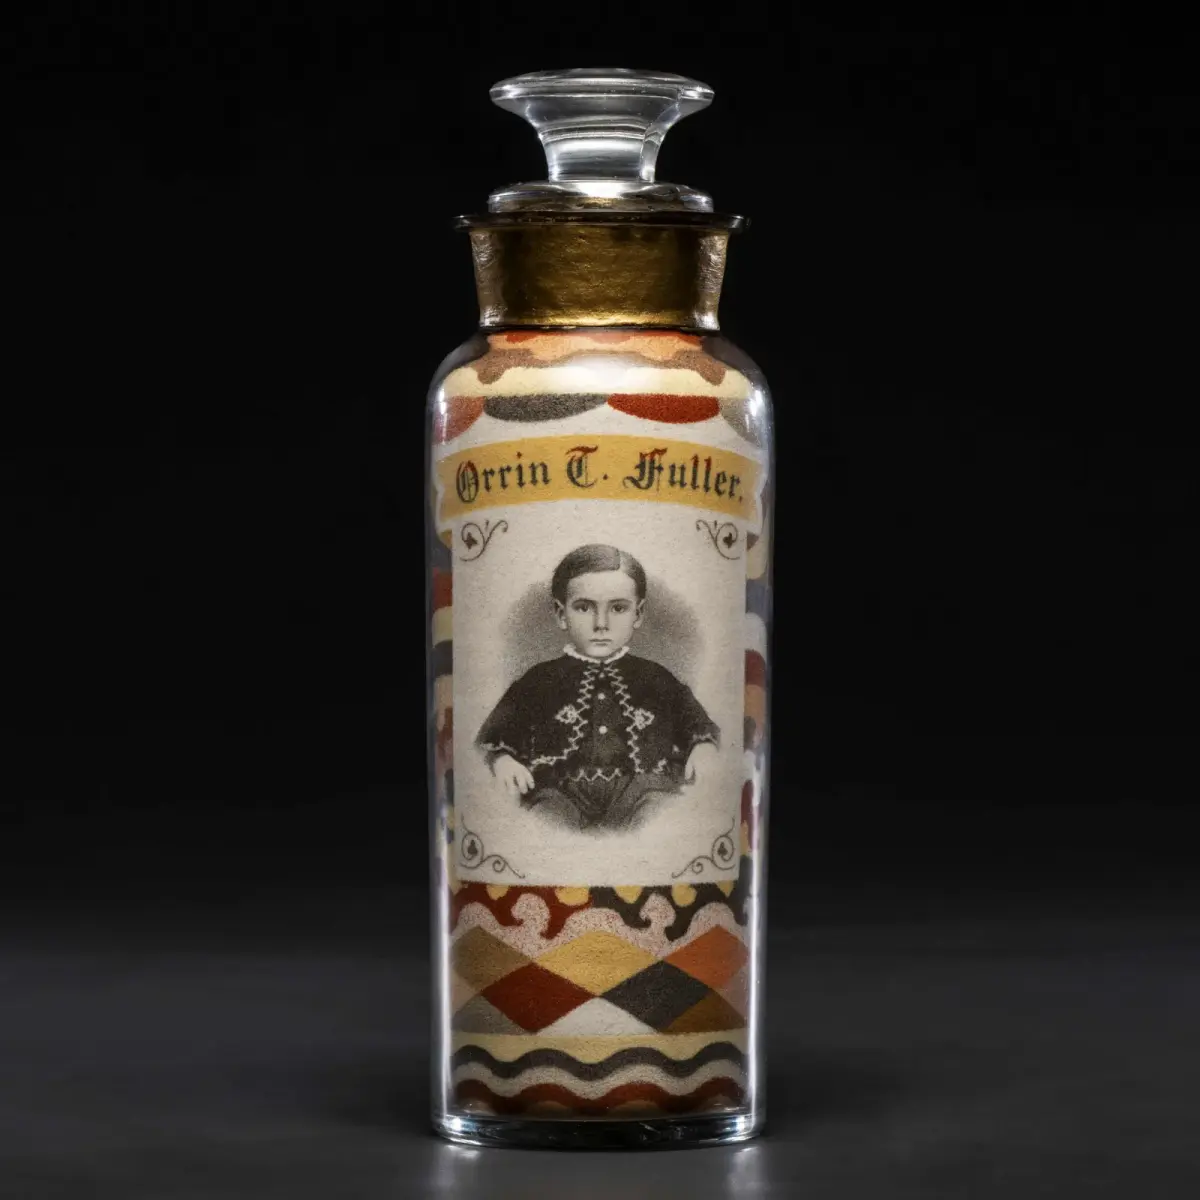 This rare and record-breaking bottle of sand art by Andrew Clemens is the only known example that features a portrait.